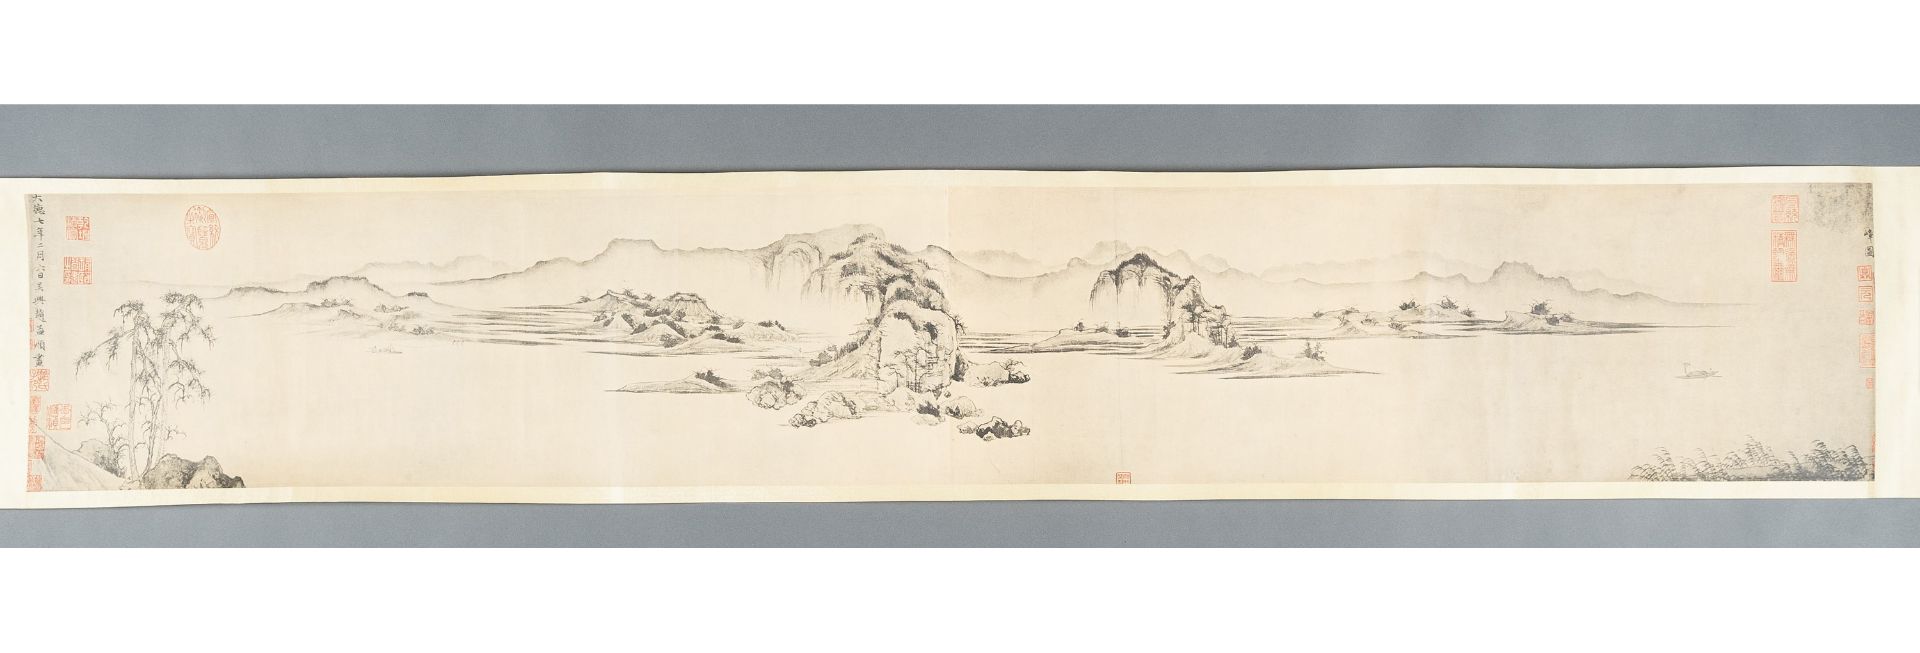 A MUSEUM COPY OF 'RIVERS AND MOUNTAINS, BY CHAO MENG-FU'